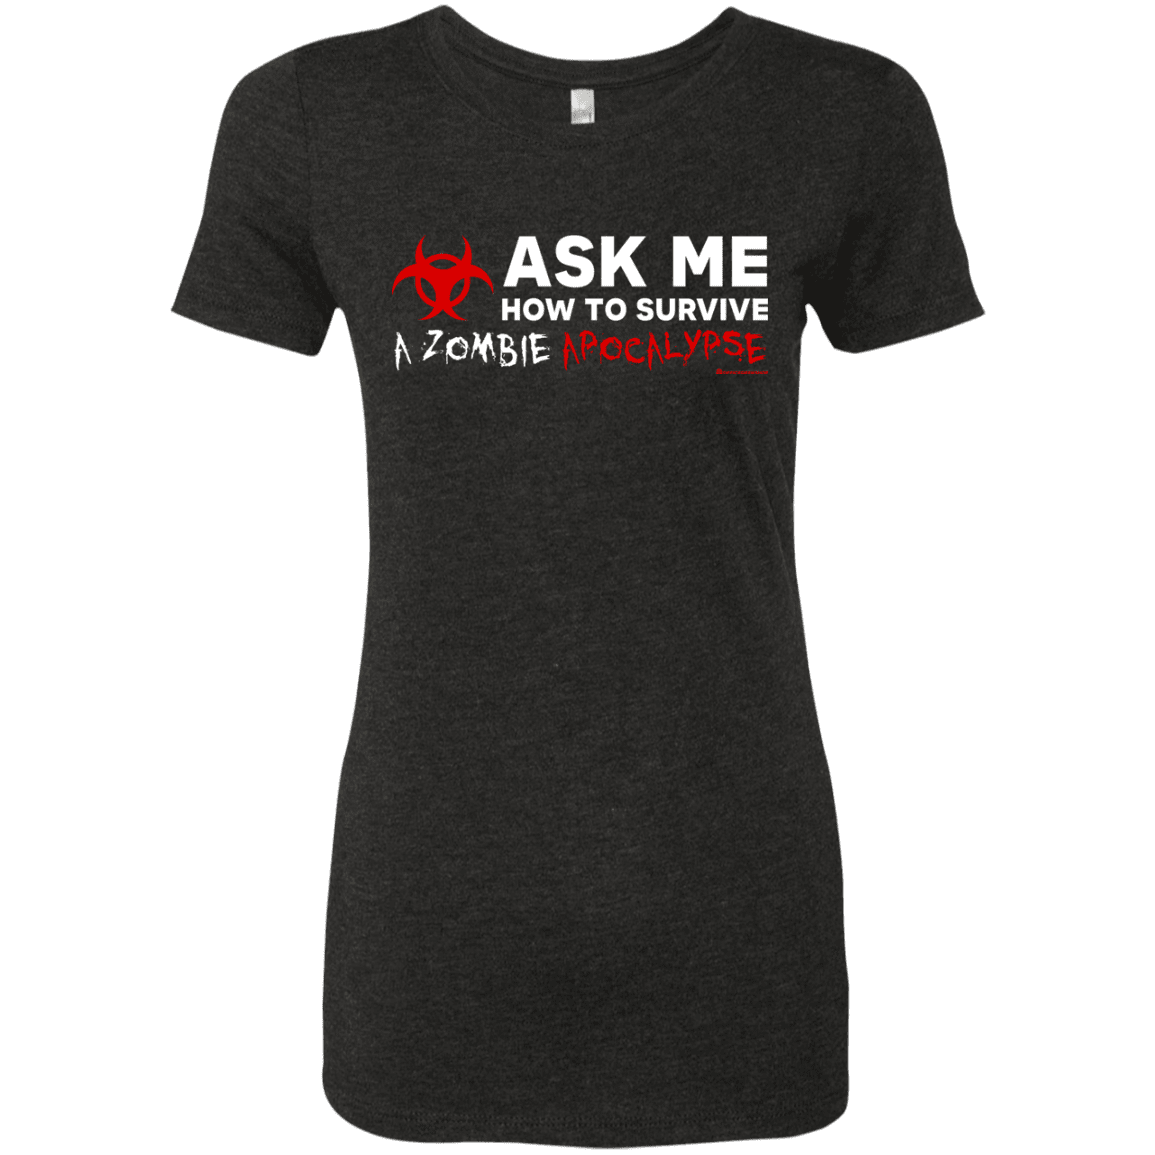 Rasende infrastruktur Hold sammen med Ask Me How To Survive A Zombie Apocalypse Women's Triblend T-Shirt – Pop Up  Tee